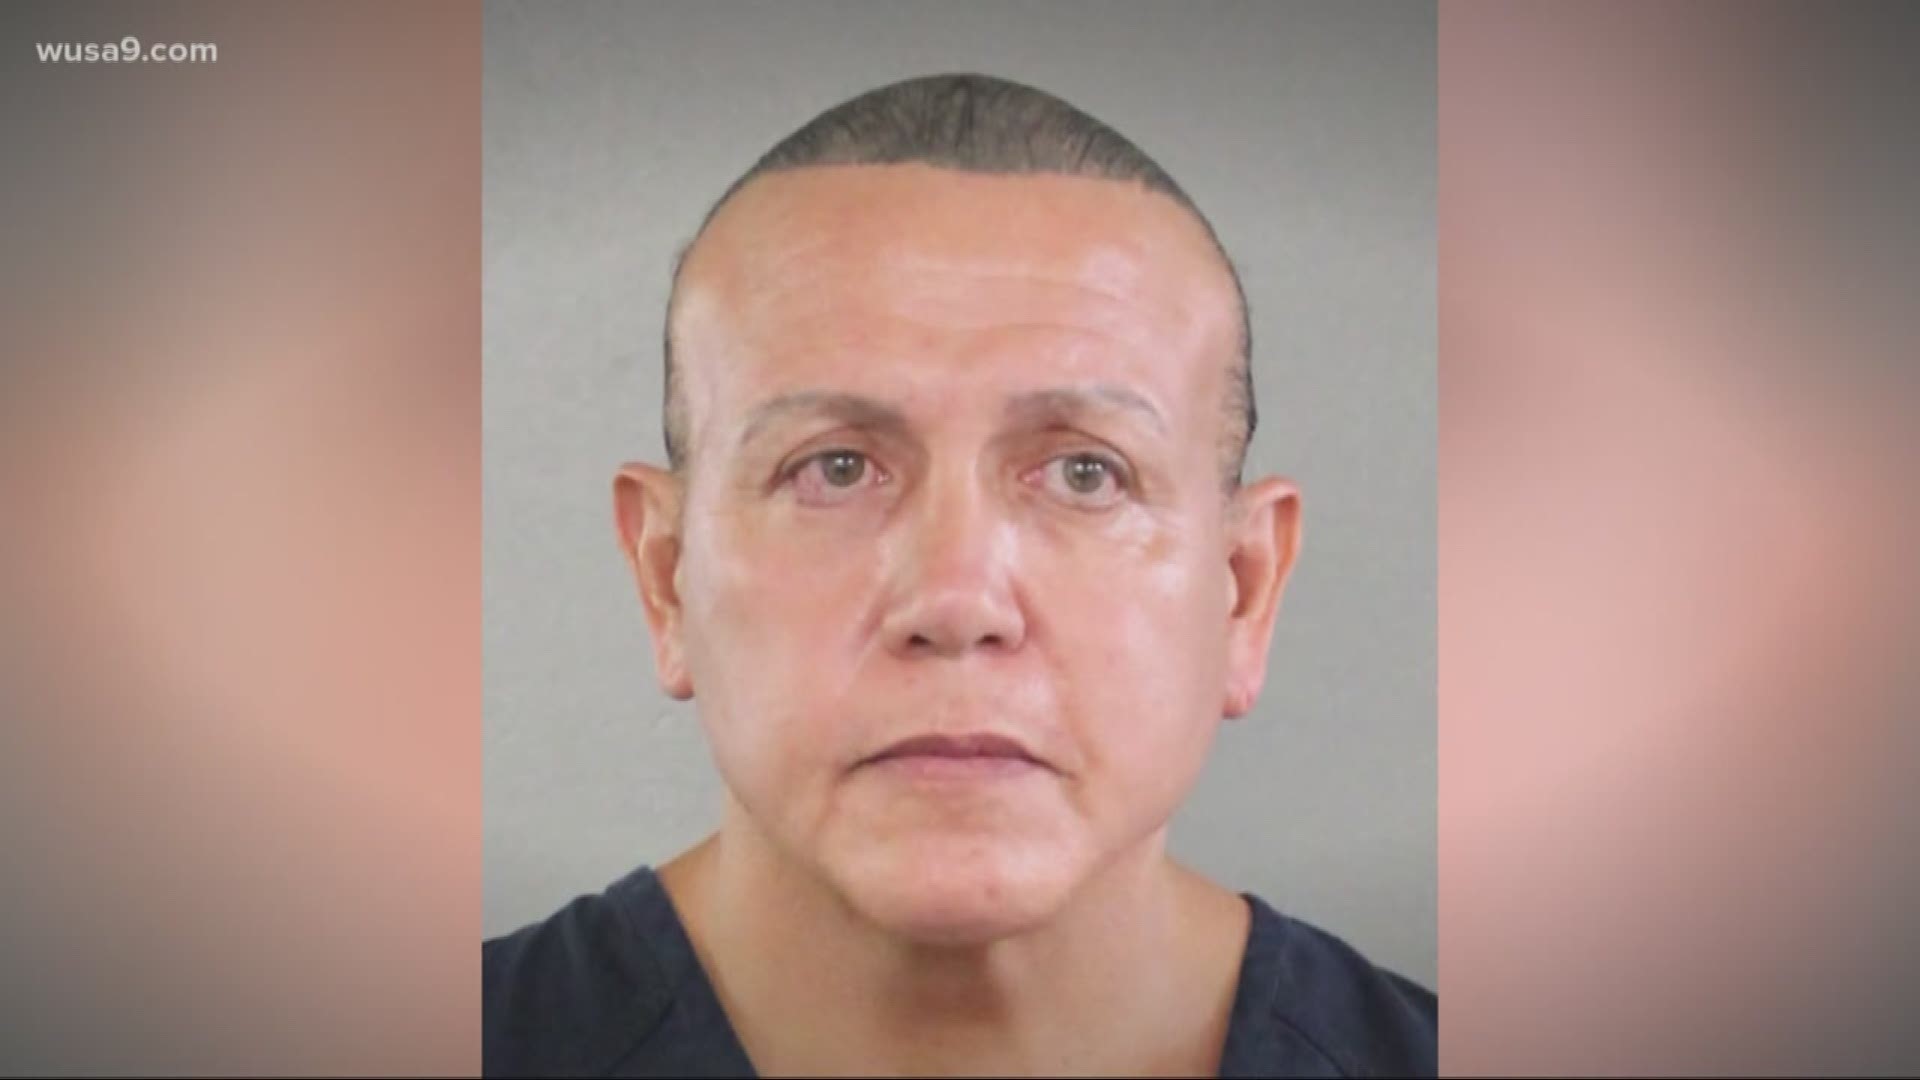 Cesar Sayoc has been sentenced to 20 years in prison. He's the Florida man who mailed 16 inactive pipe bombs to high-profile Democrats, news media and critics of President Trump.